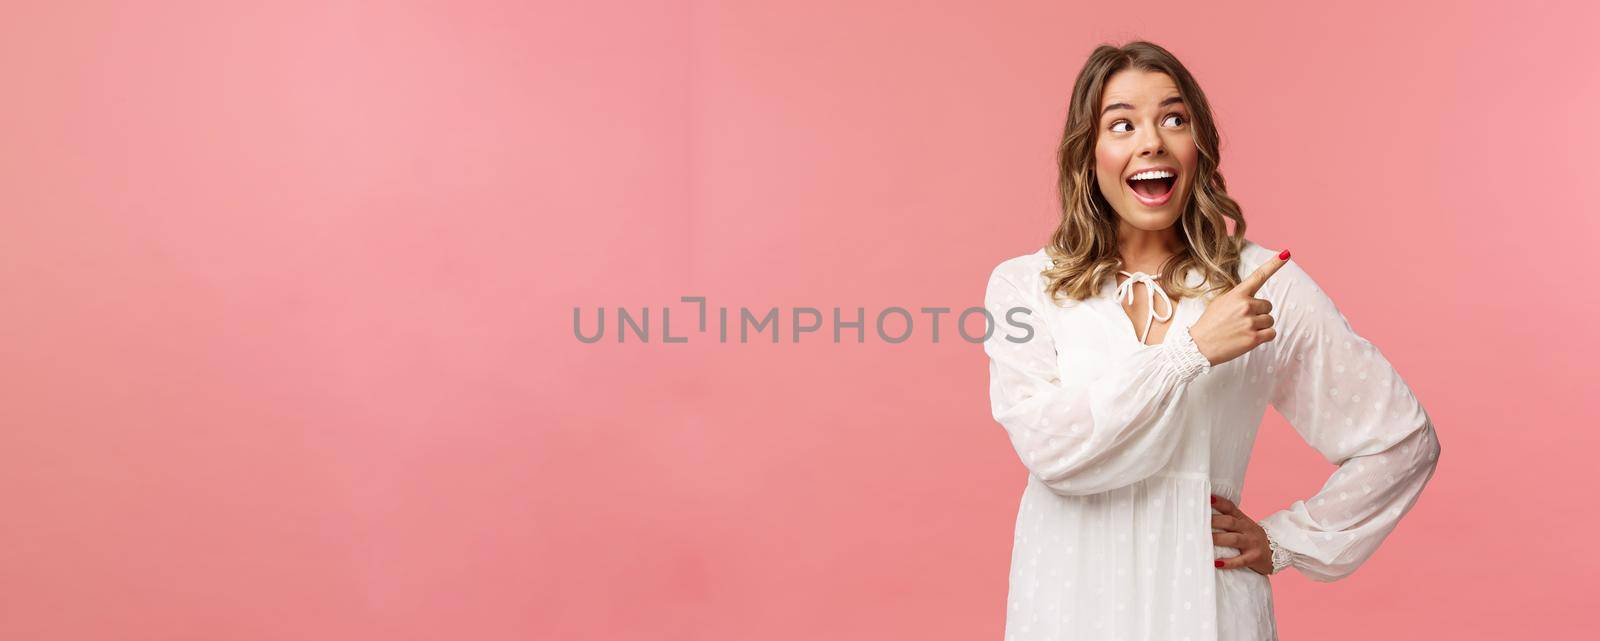 Enthusiastic, happy attractive blond woman in white cute dress, open mouth excited and cheerful looking, pointing upper right corner as best prices discounts ever, stand pink background.